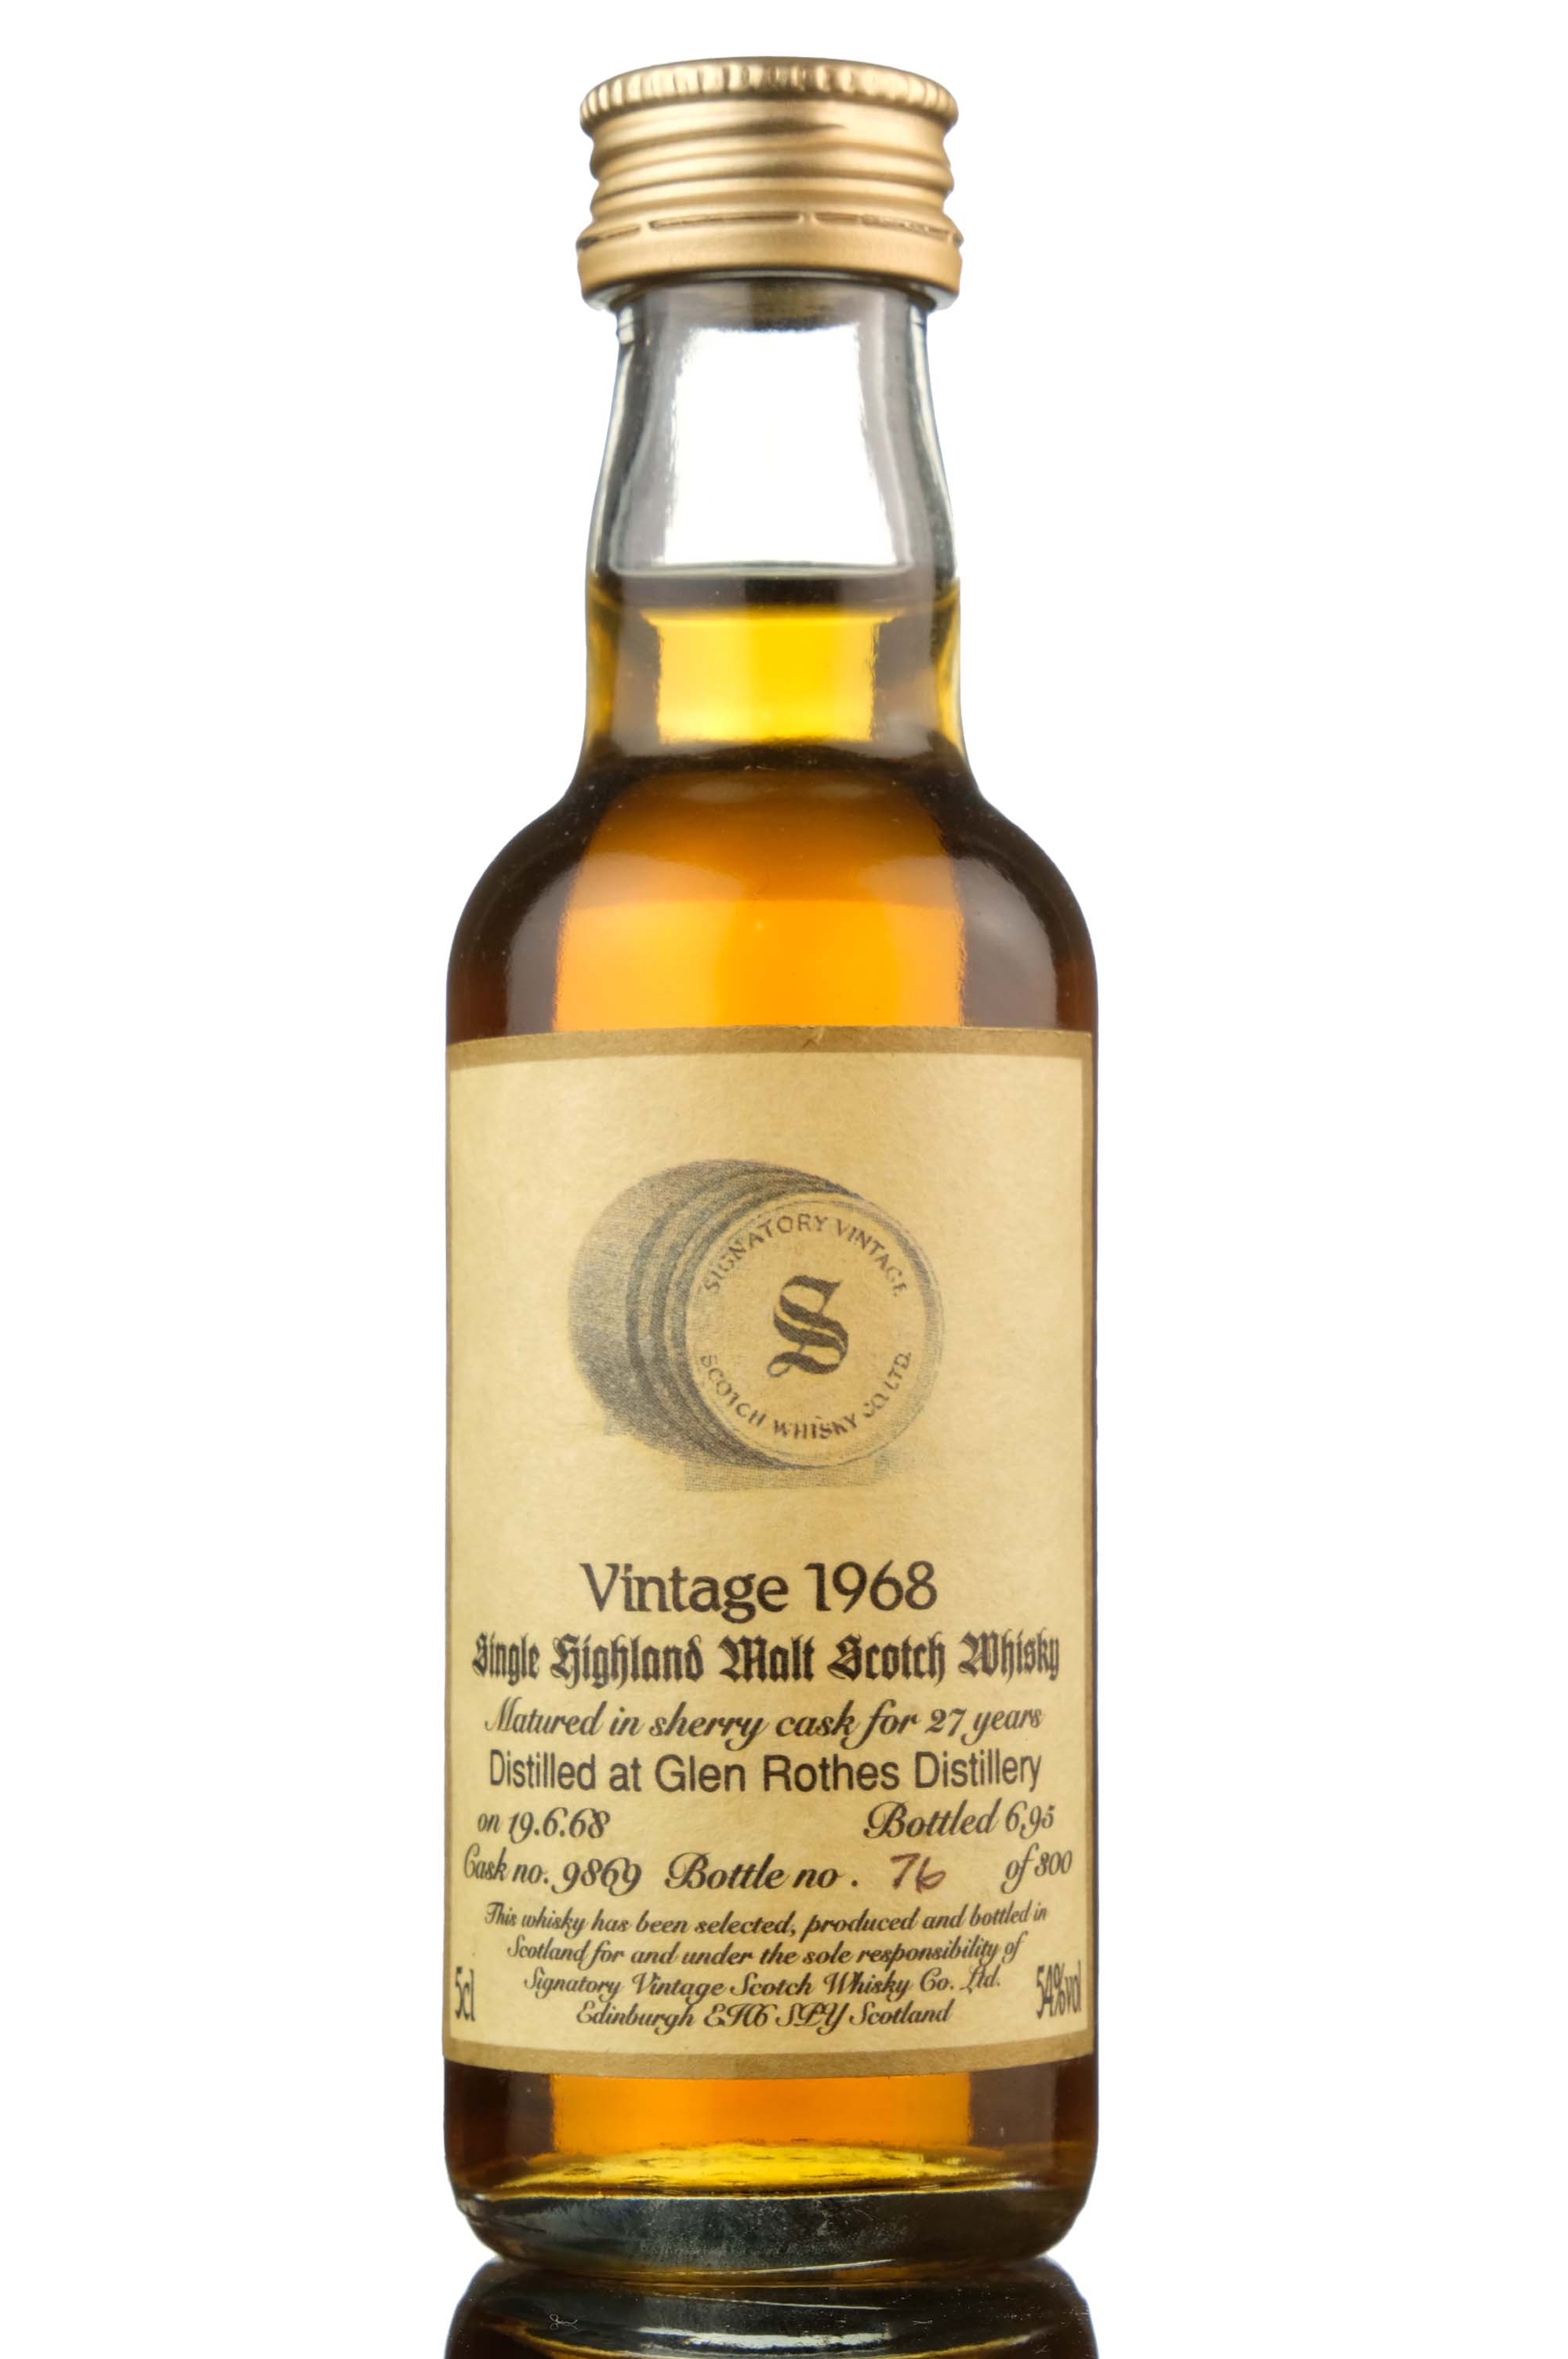 Glenrothes 1968-1995 - 27 Year Old - Signatory Vintage - Single Cask 9869 - Miniature